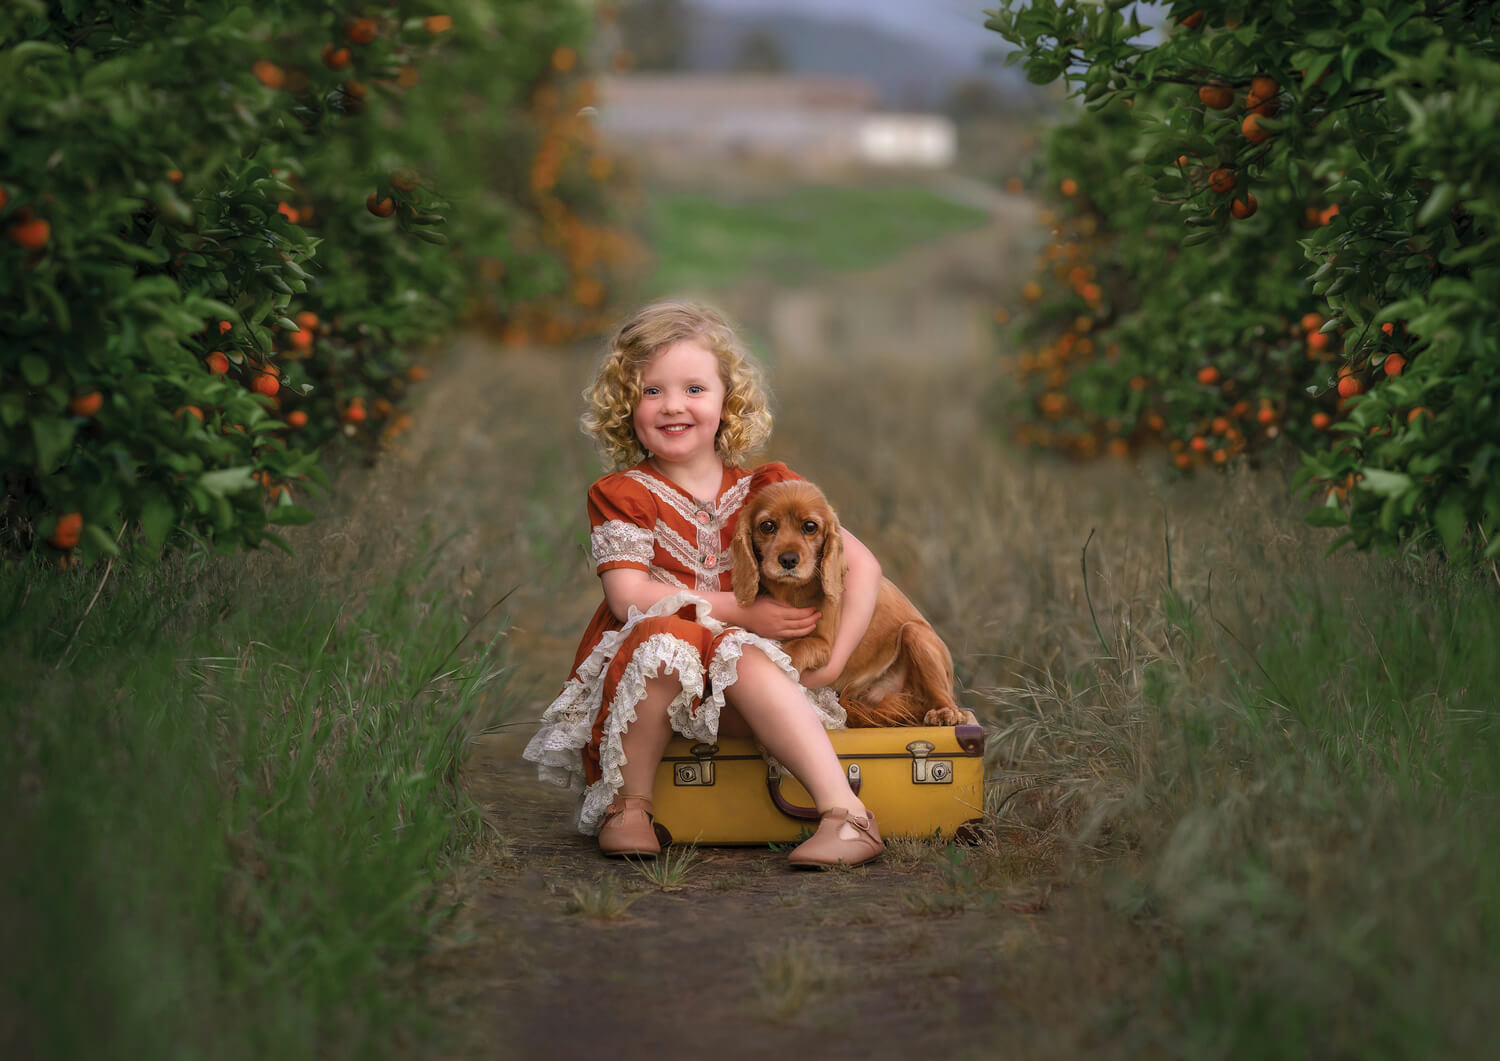 Perth girl sitting with her dog during photoshoot at an orange farm.